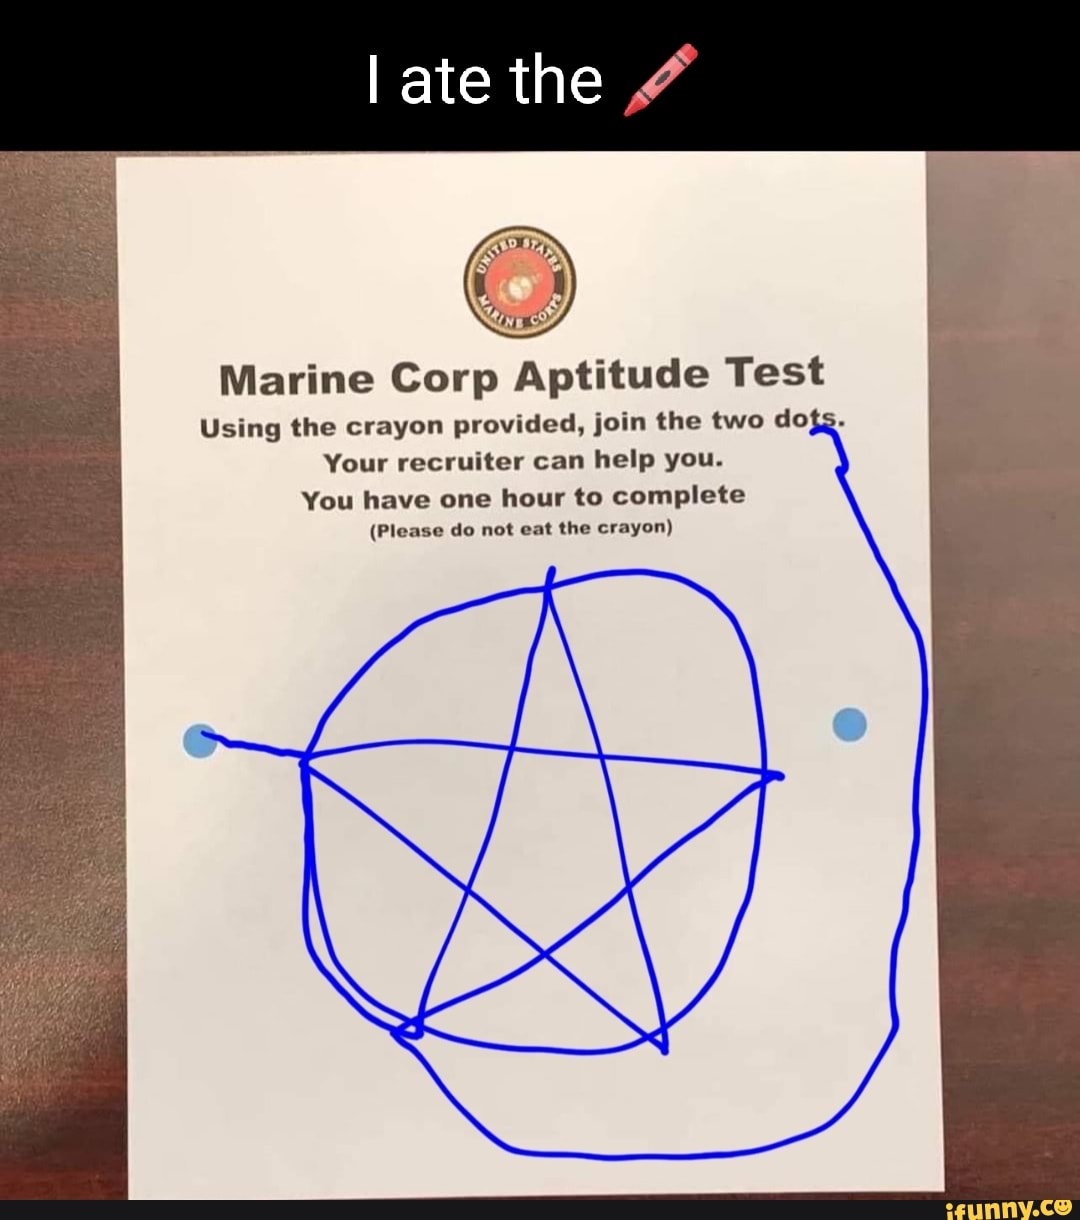 late-the-marine-corp-aptitude-test-using-the-crayon-provided-join-the-two-do-your-recruiter-can